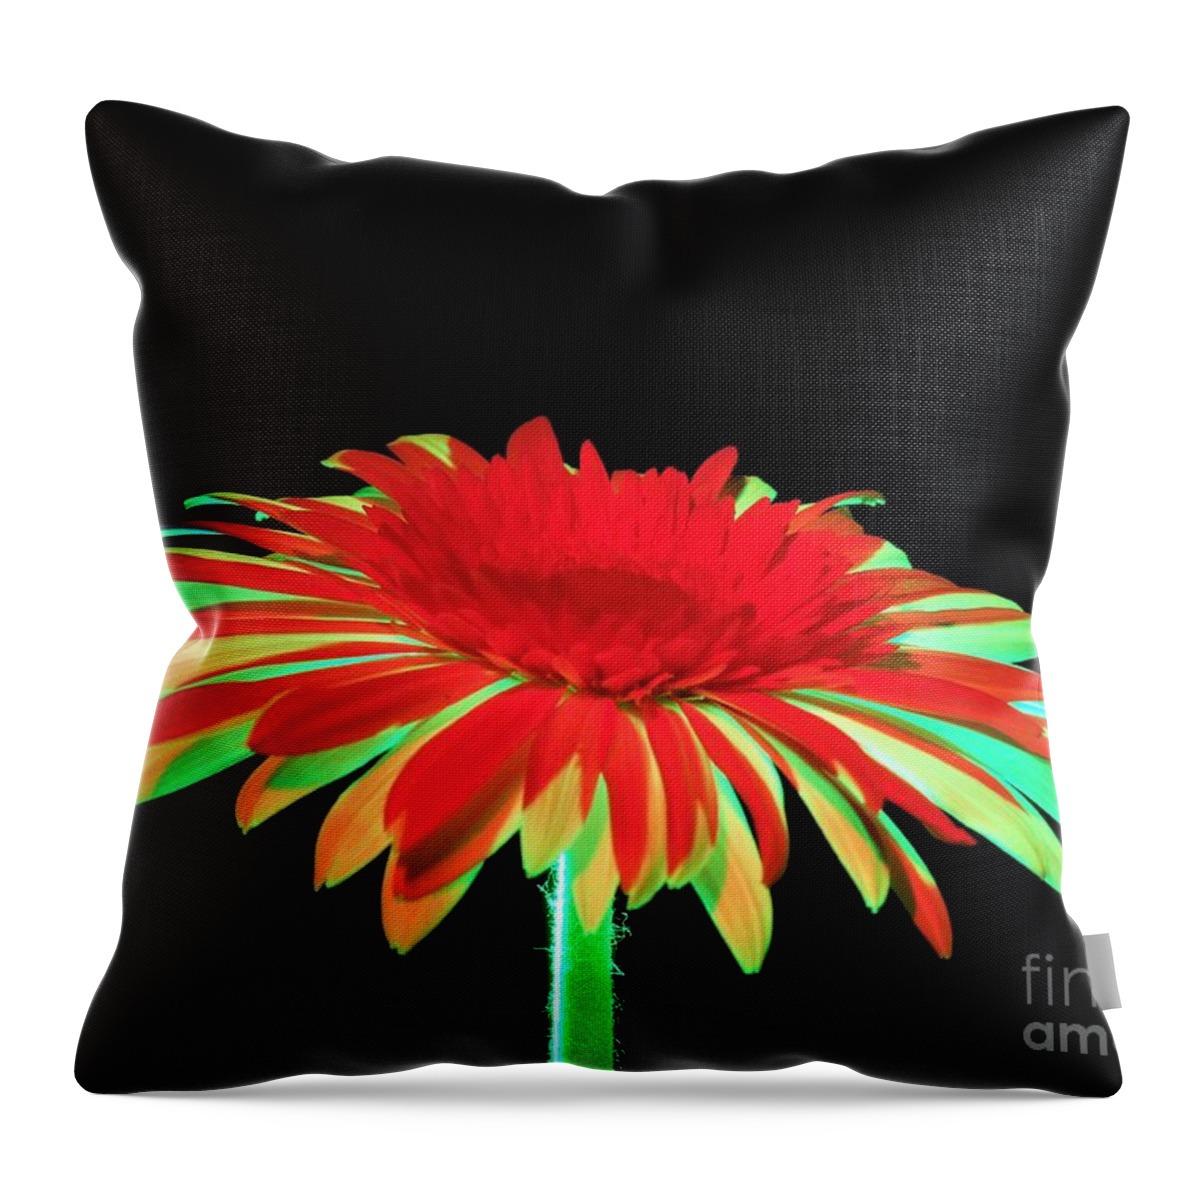 Daisy Throw Pillow featuring the photograph Christmas Daisy by Chad and Stacey Hall